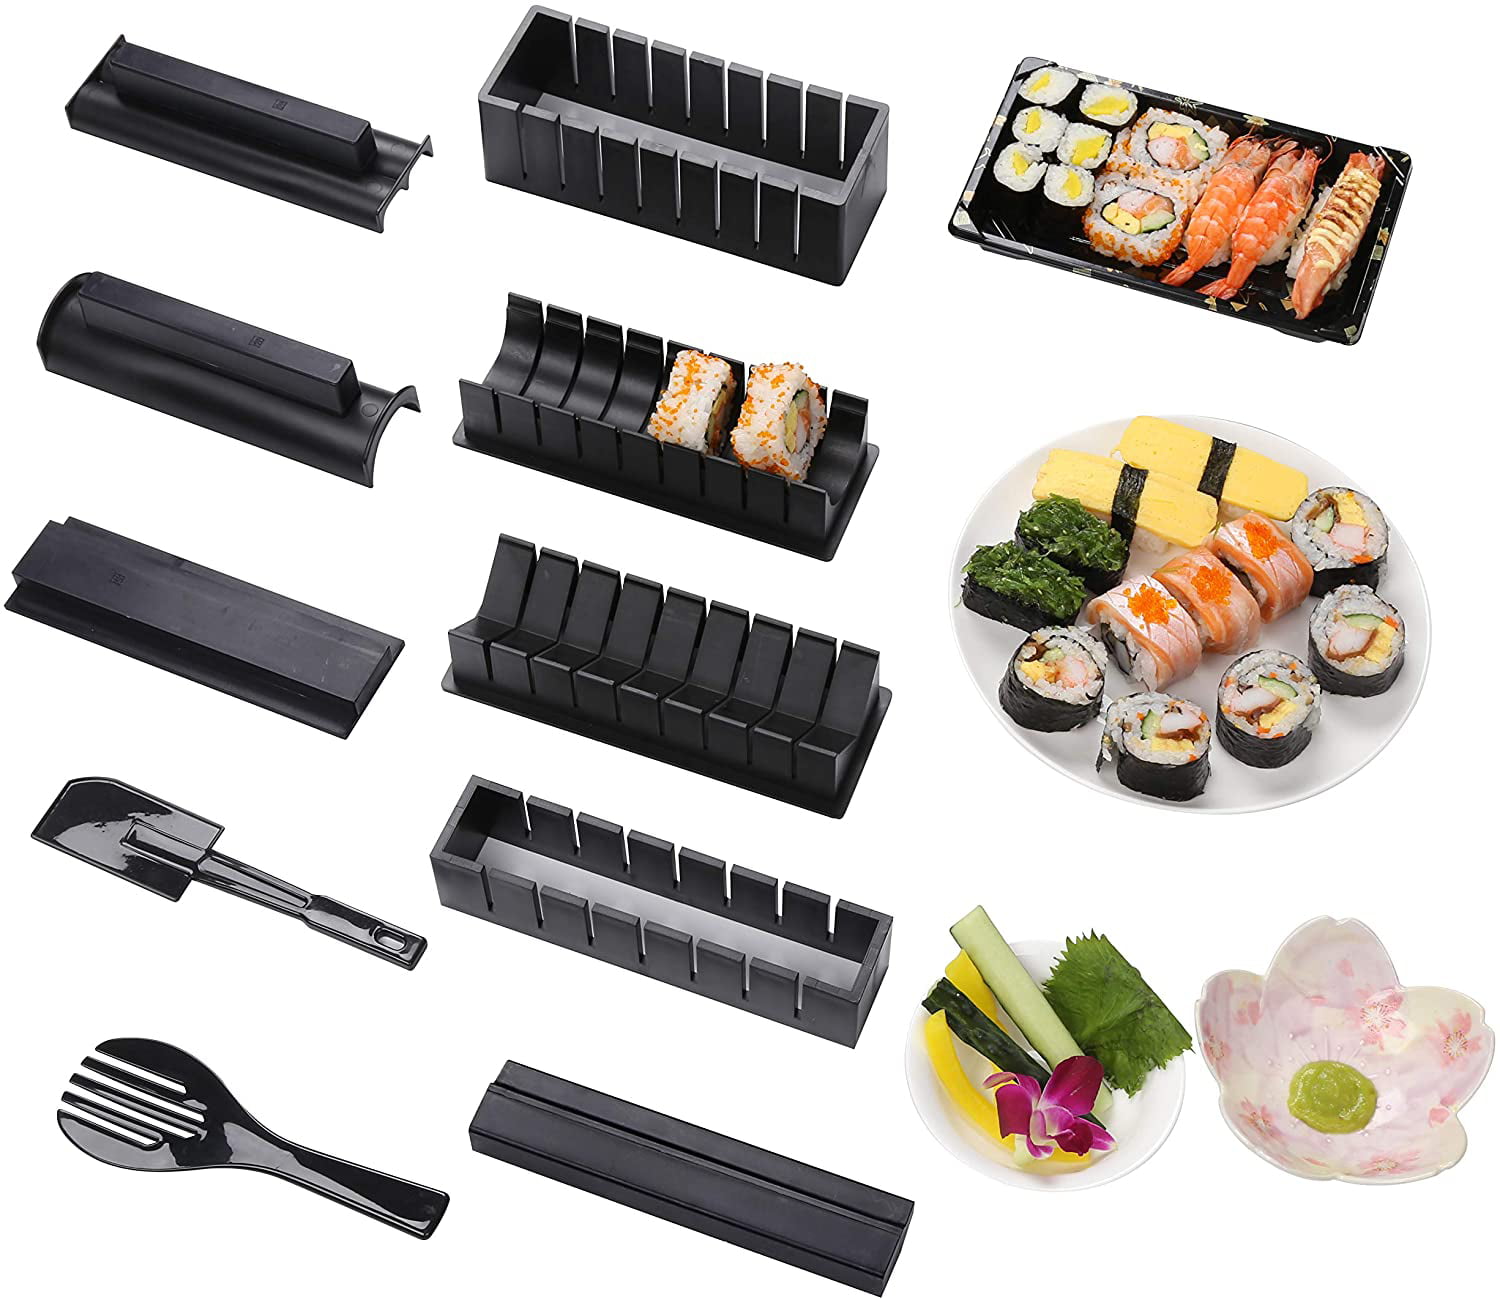 Sushi Maker Kit 10 pcs Complete Sushi Making Kit DIY Sushi Set For Beginners Easy Sushi Maker Easy and Fun Also as a gift